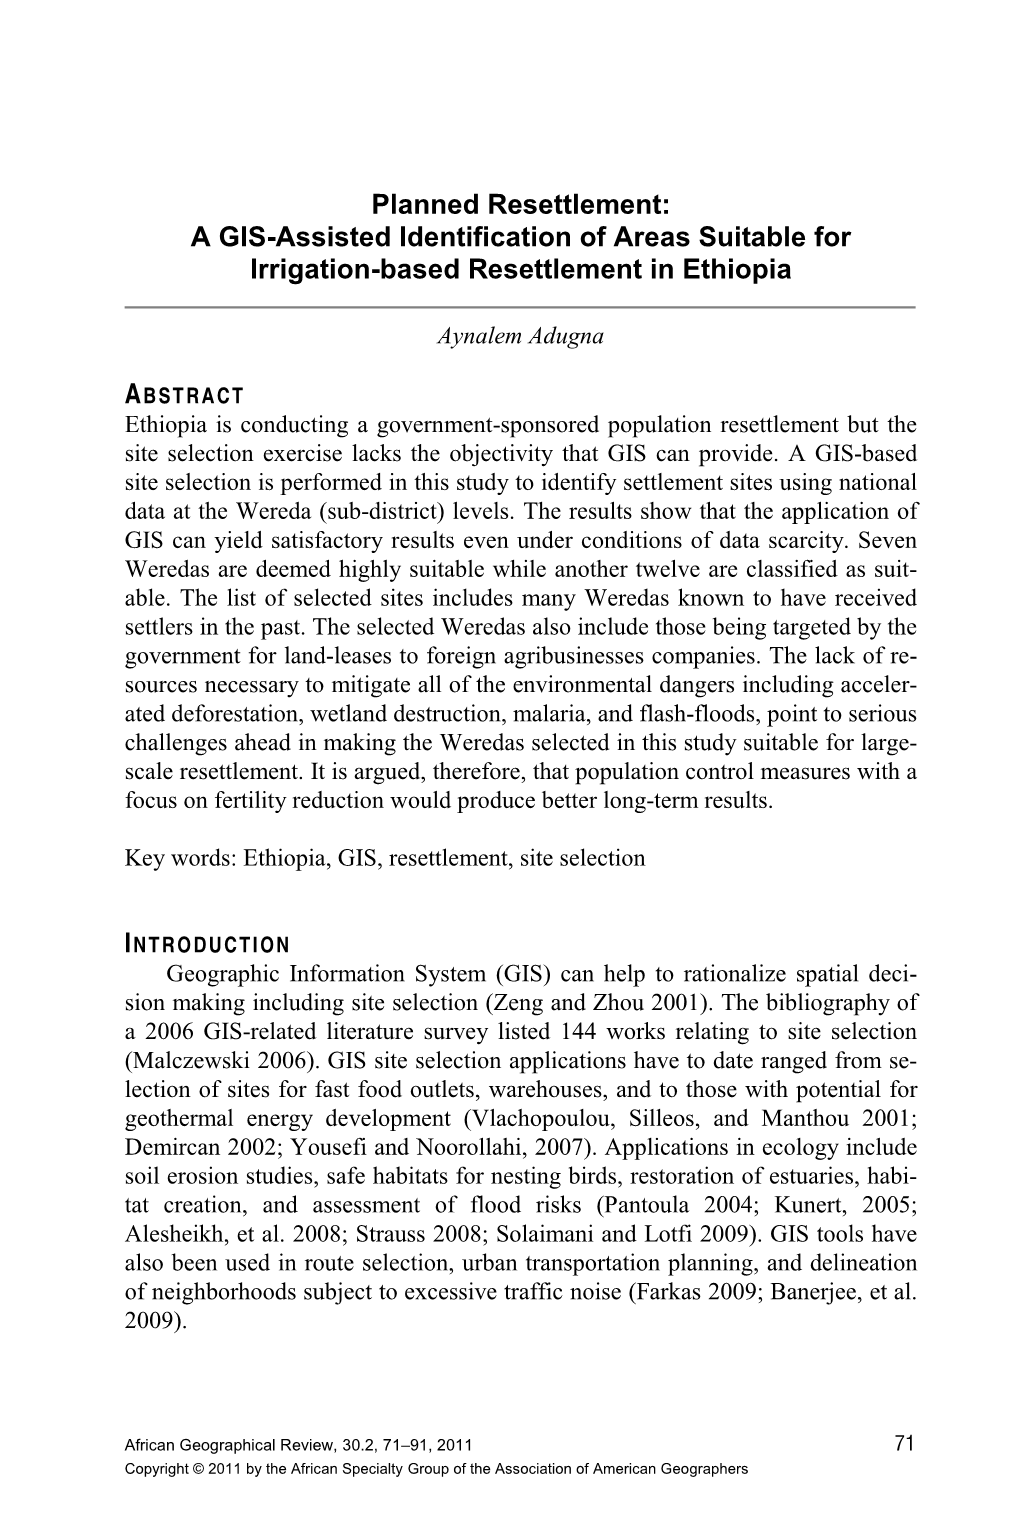 GIS-Assisted Site Selection for Resettlement